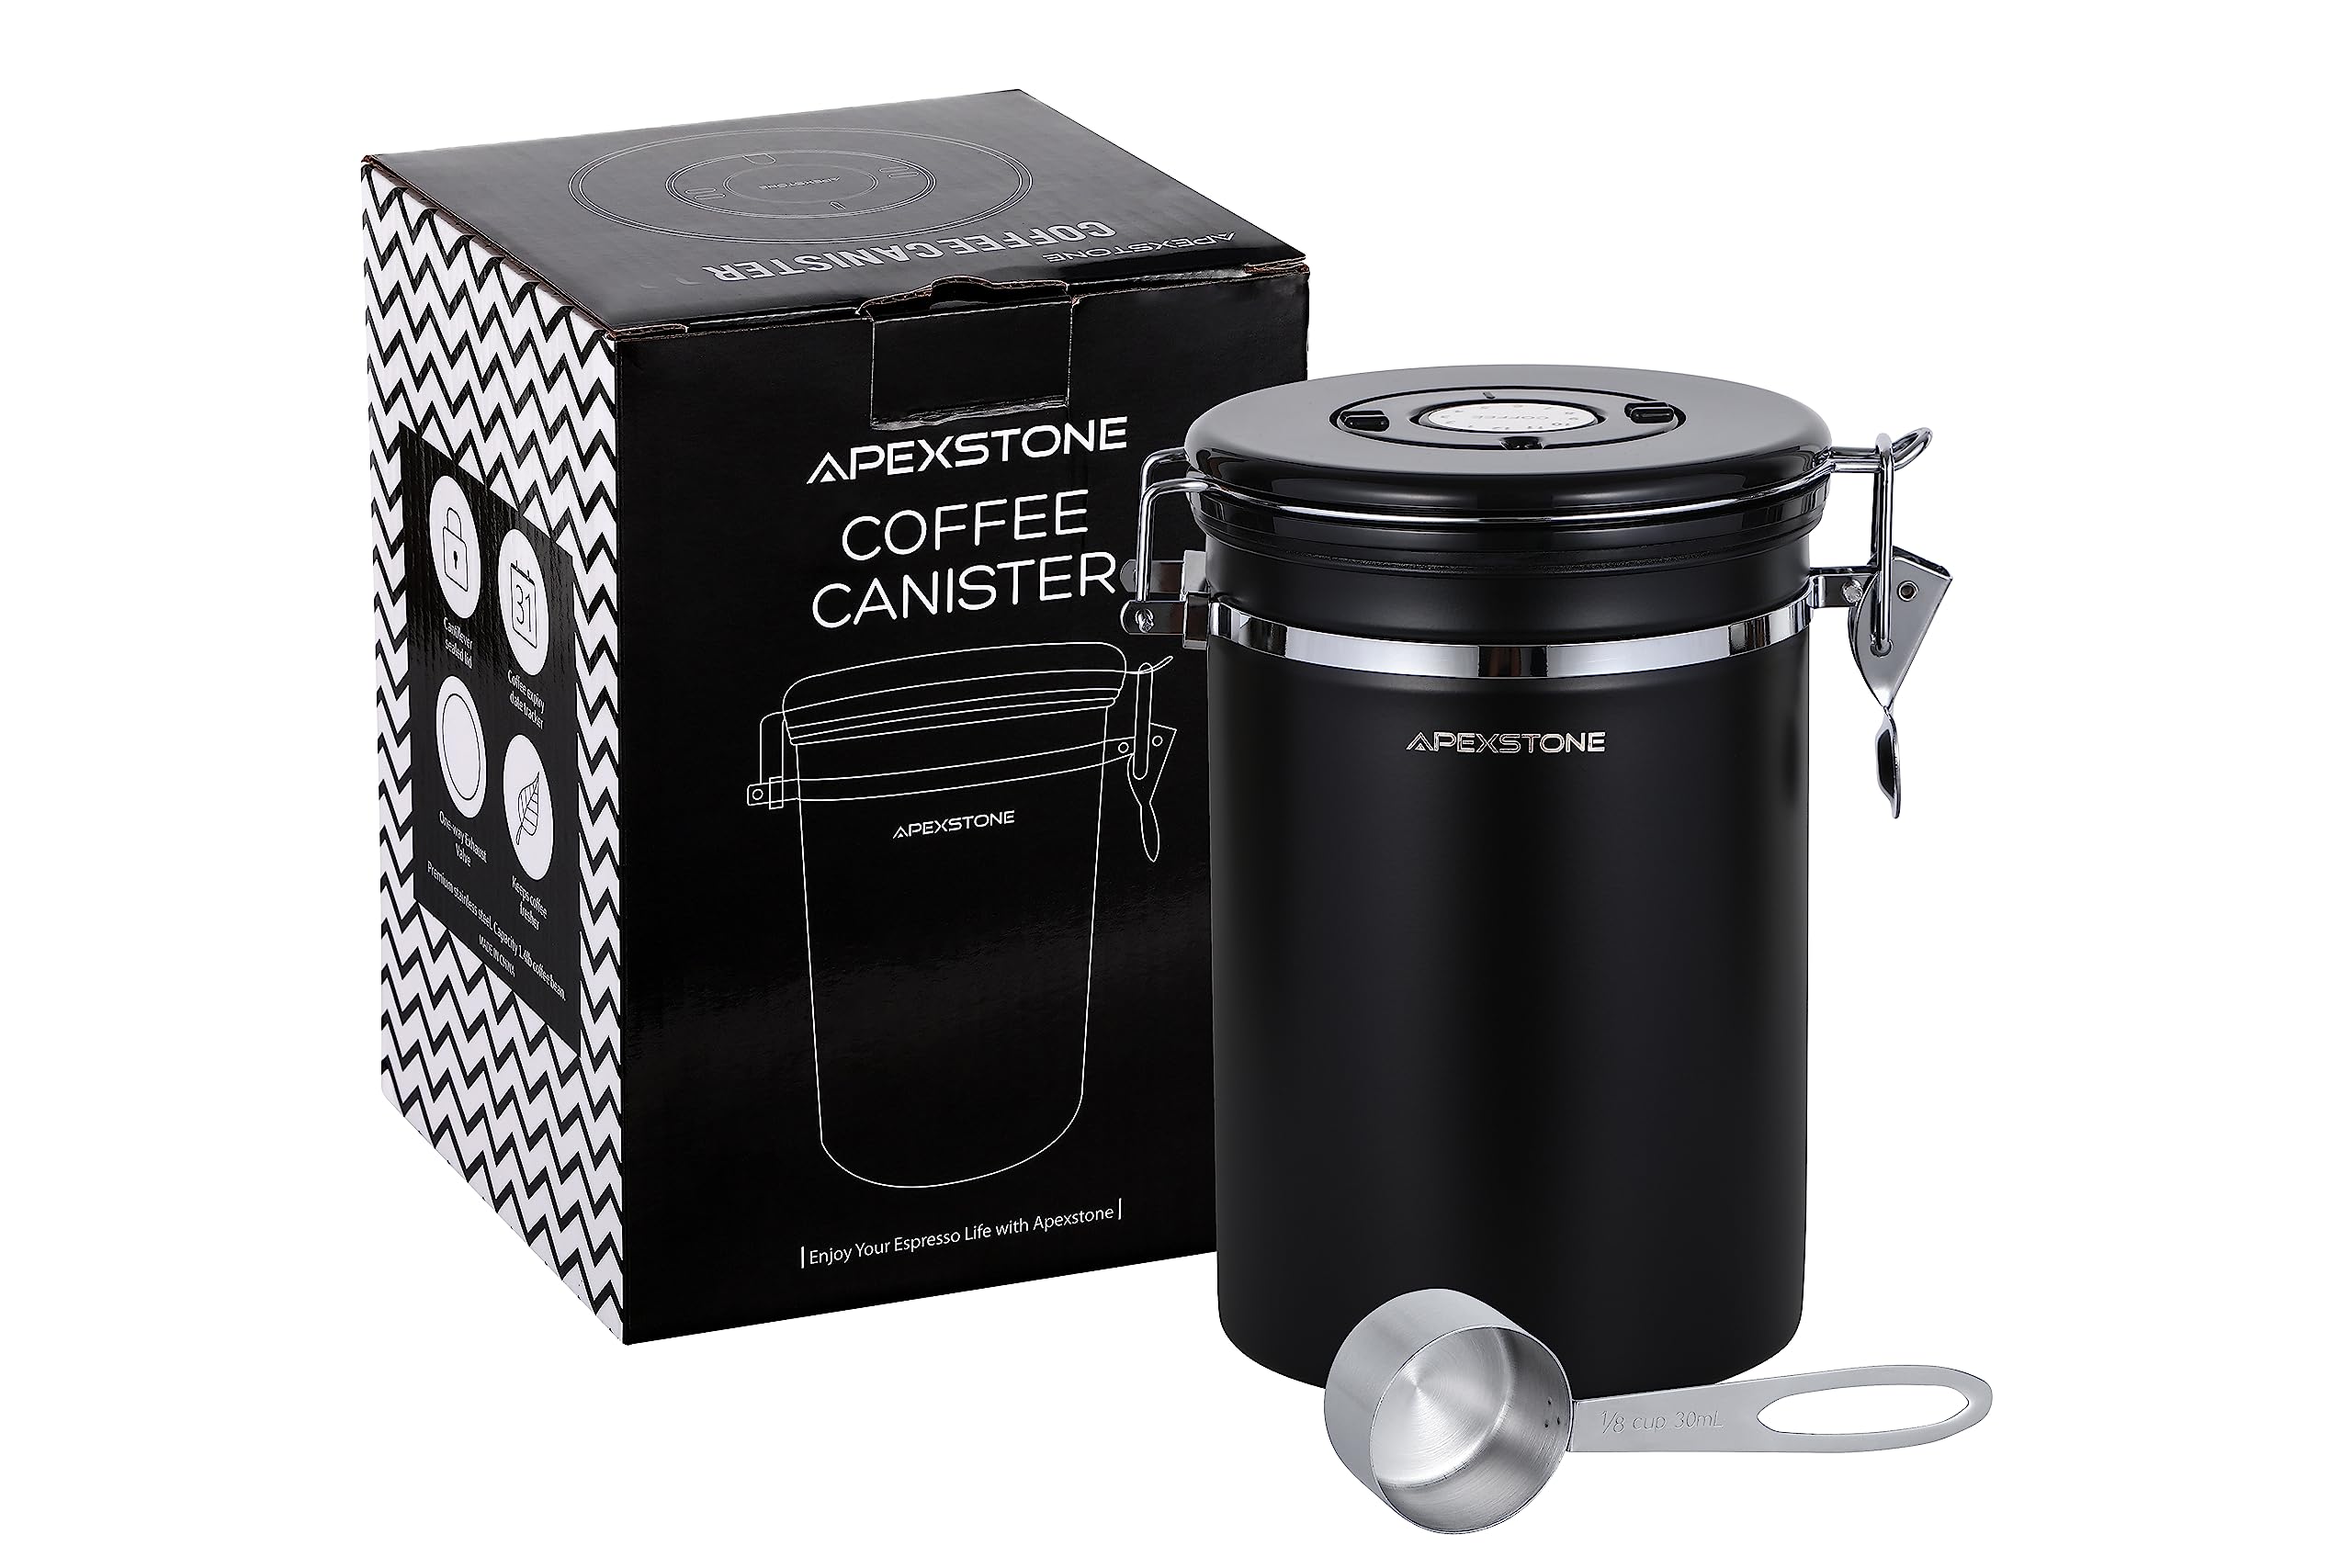 Apexstone Coffee Canister